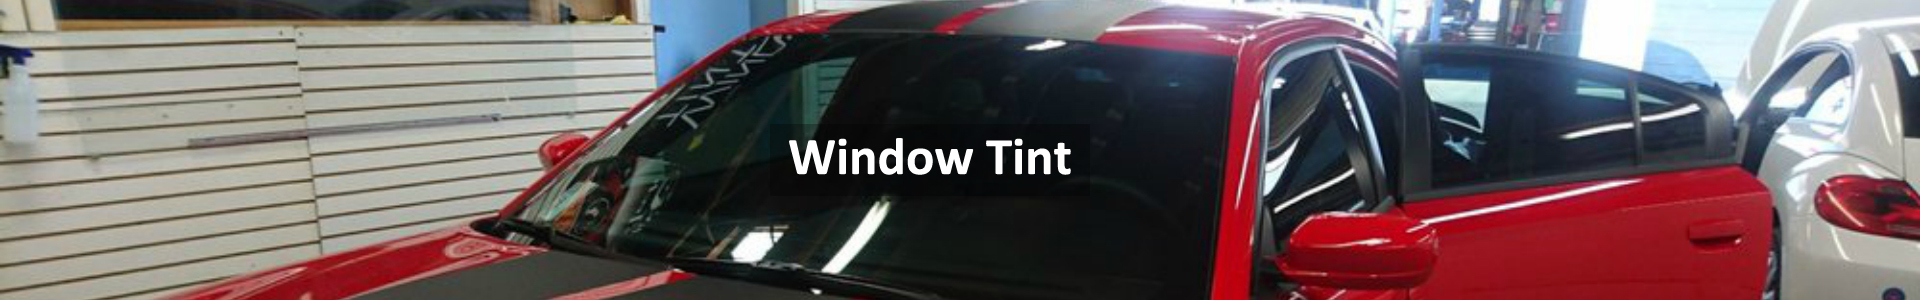 Window Tint Tulare and Kings County 